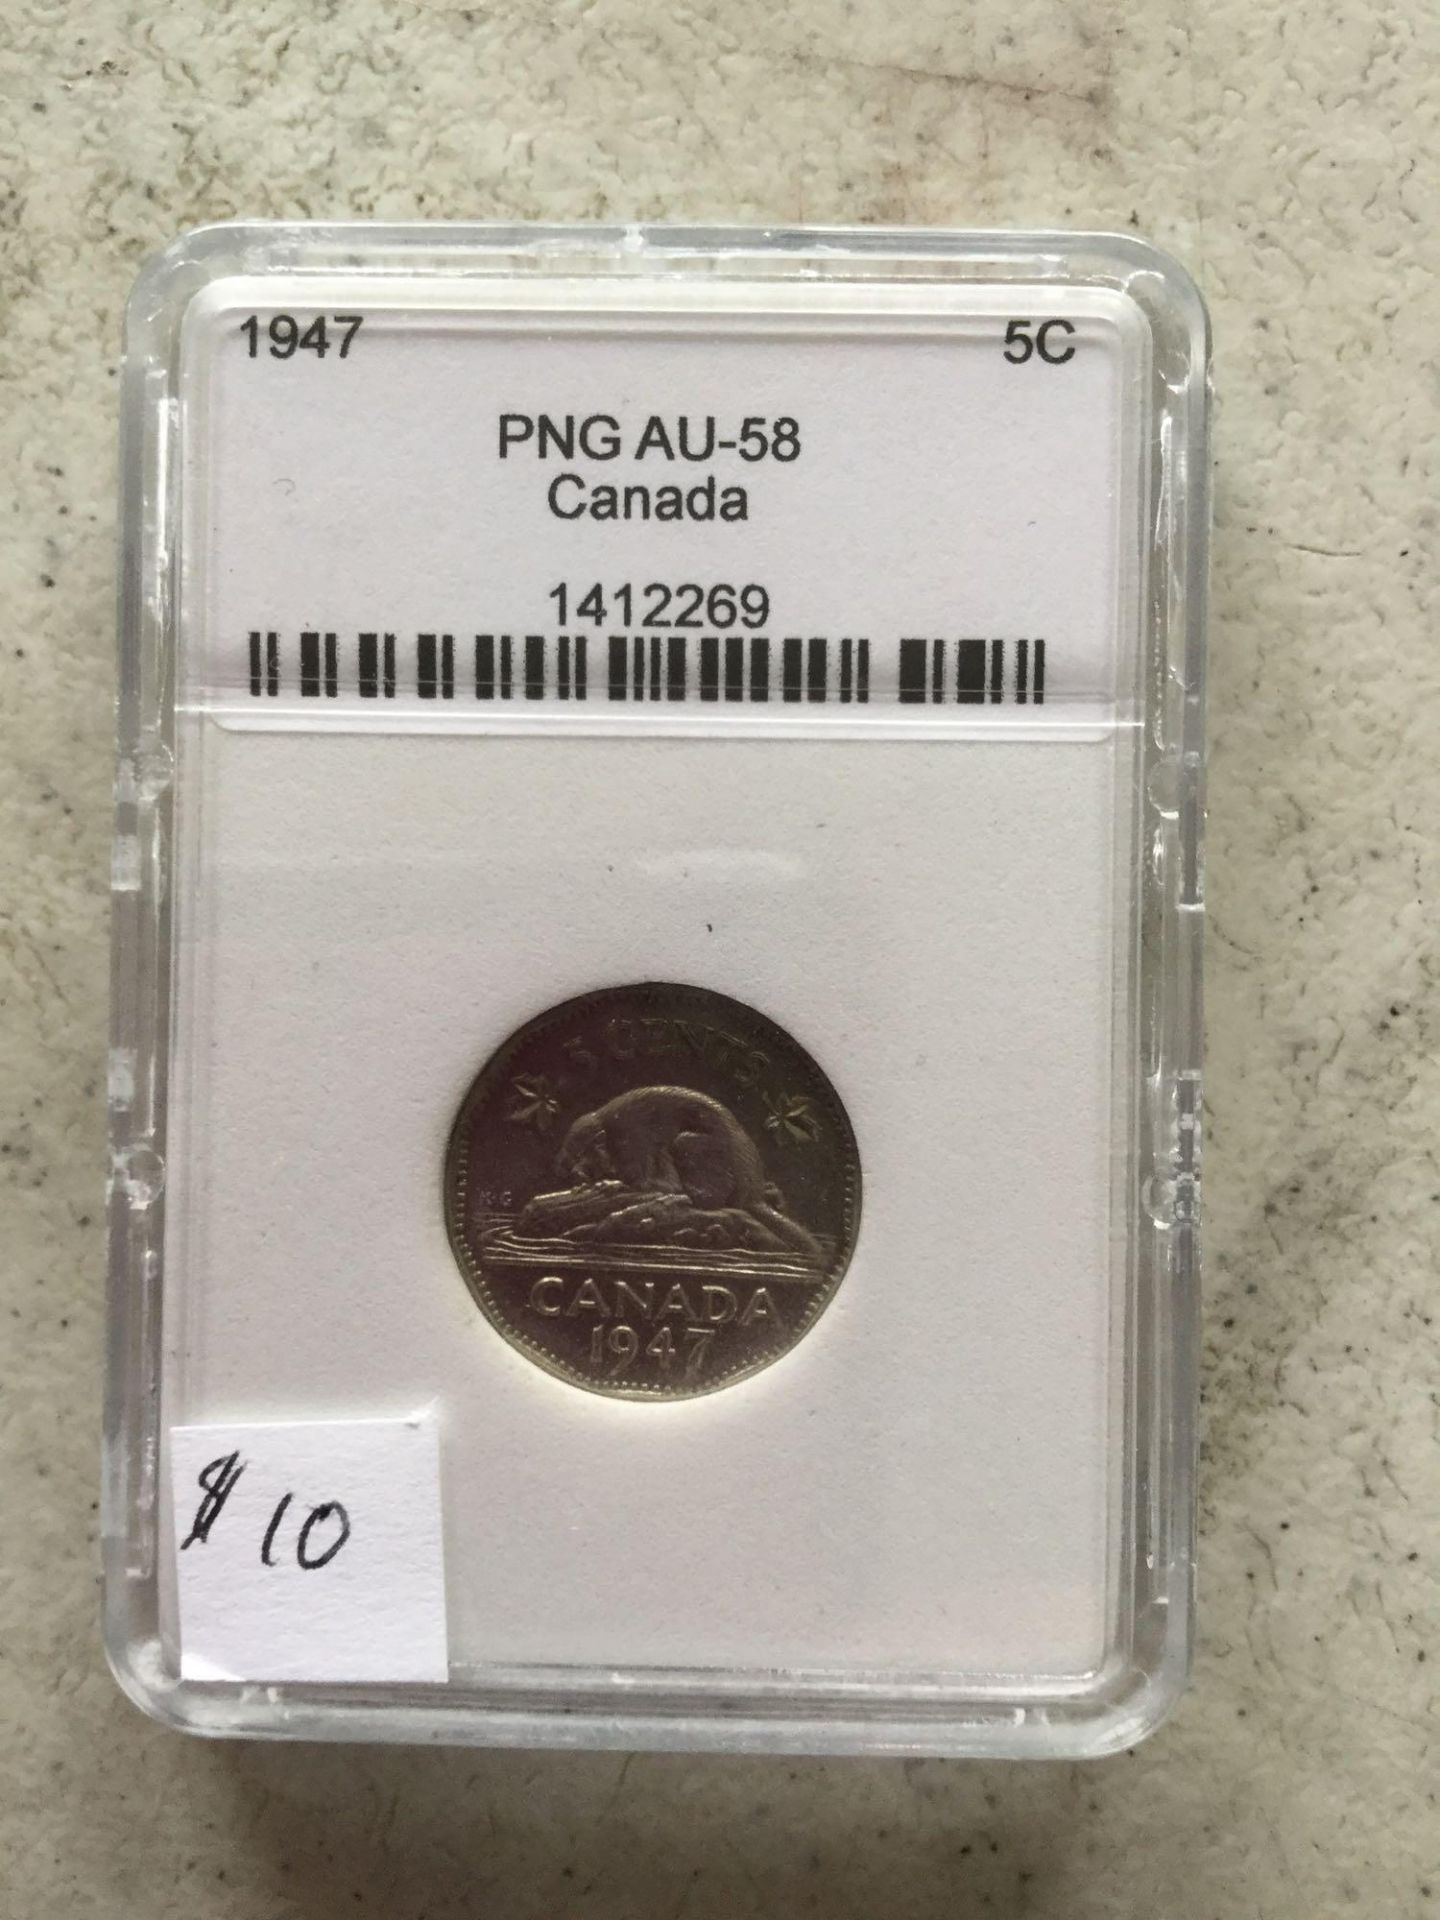 1947- Royal Canadian Mint 5 cent coin - PNG AU-58 CANADA